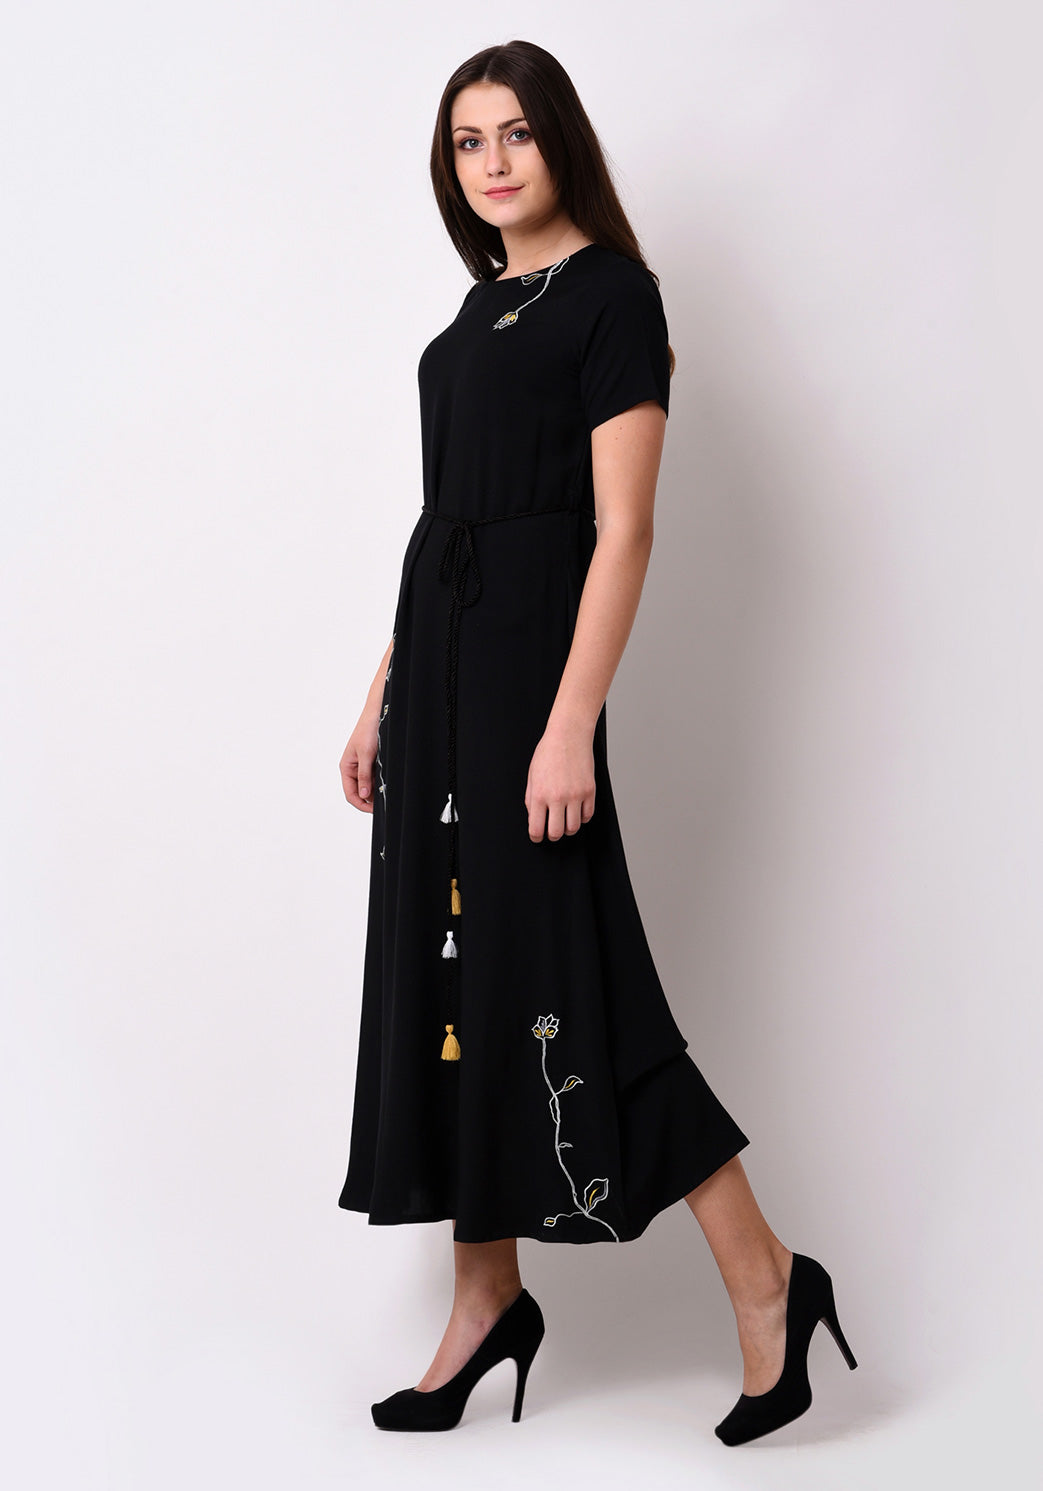 Floral Embroidered Maxi Dress - Black